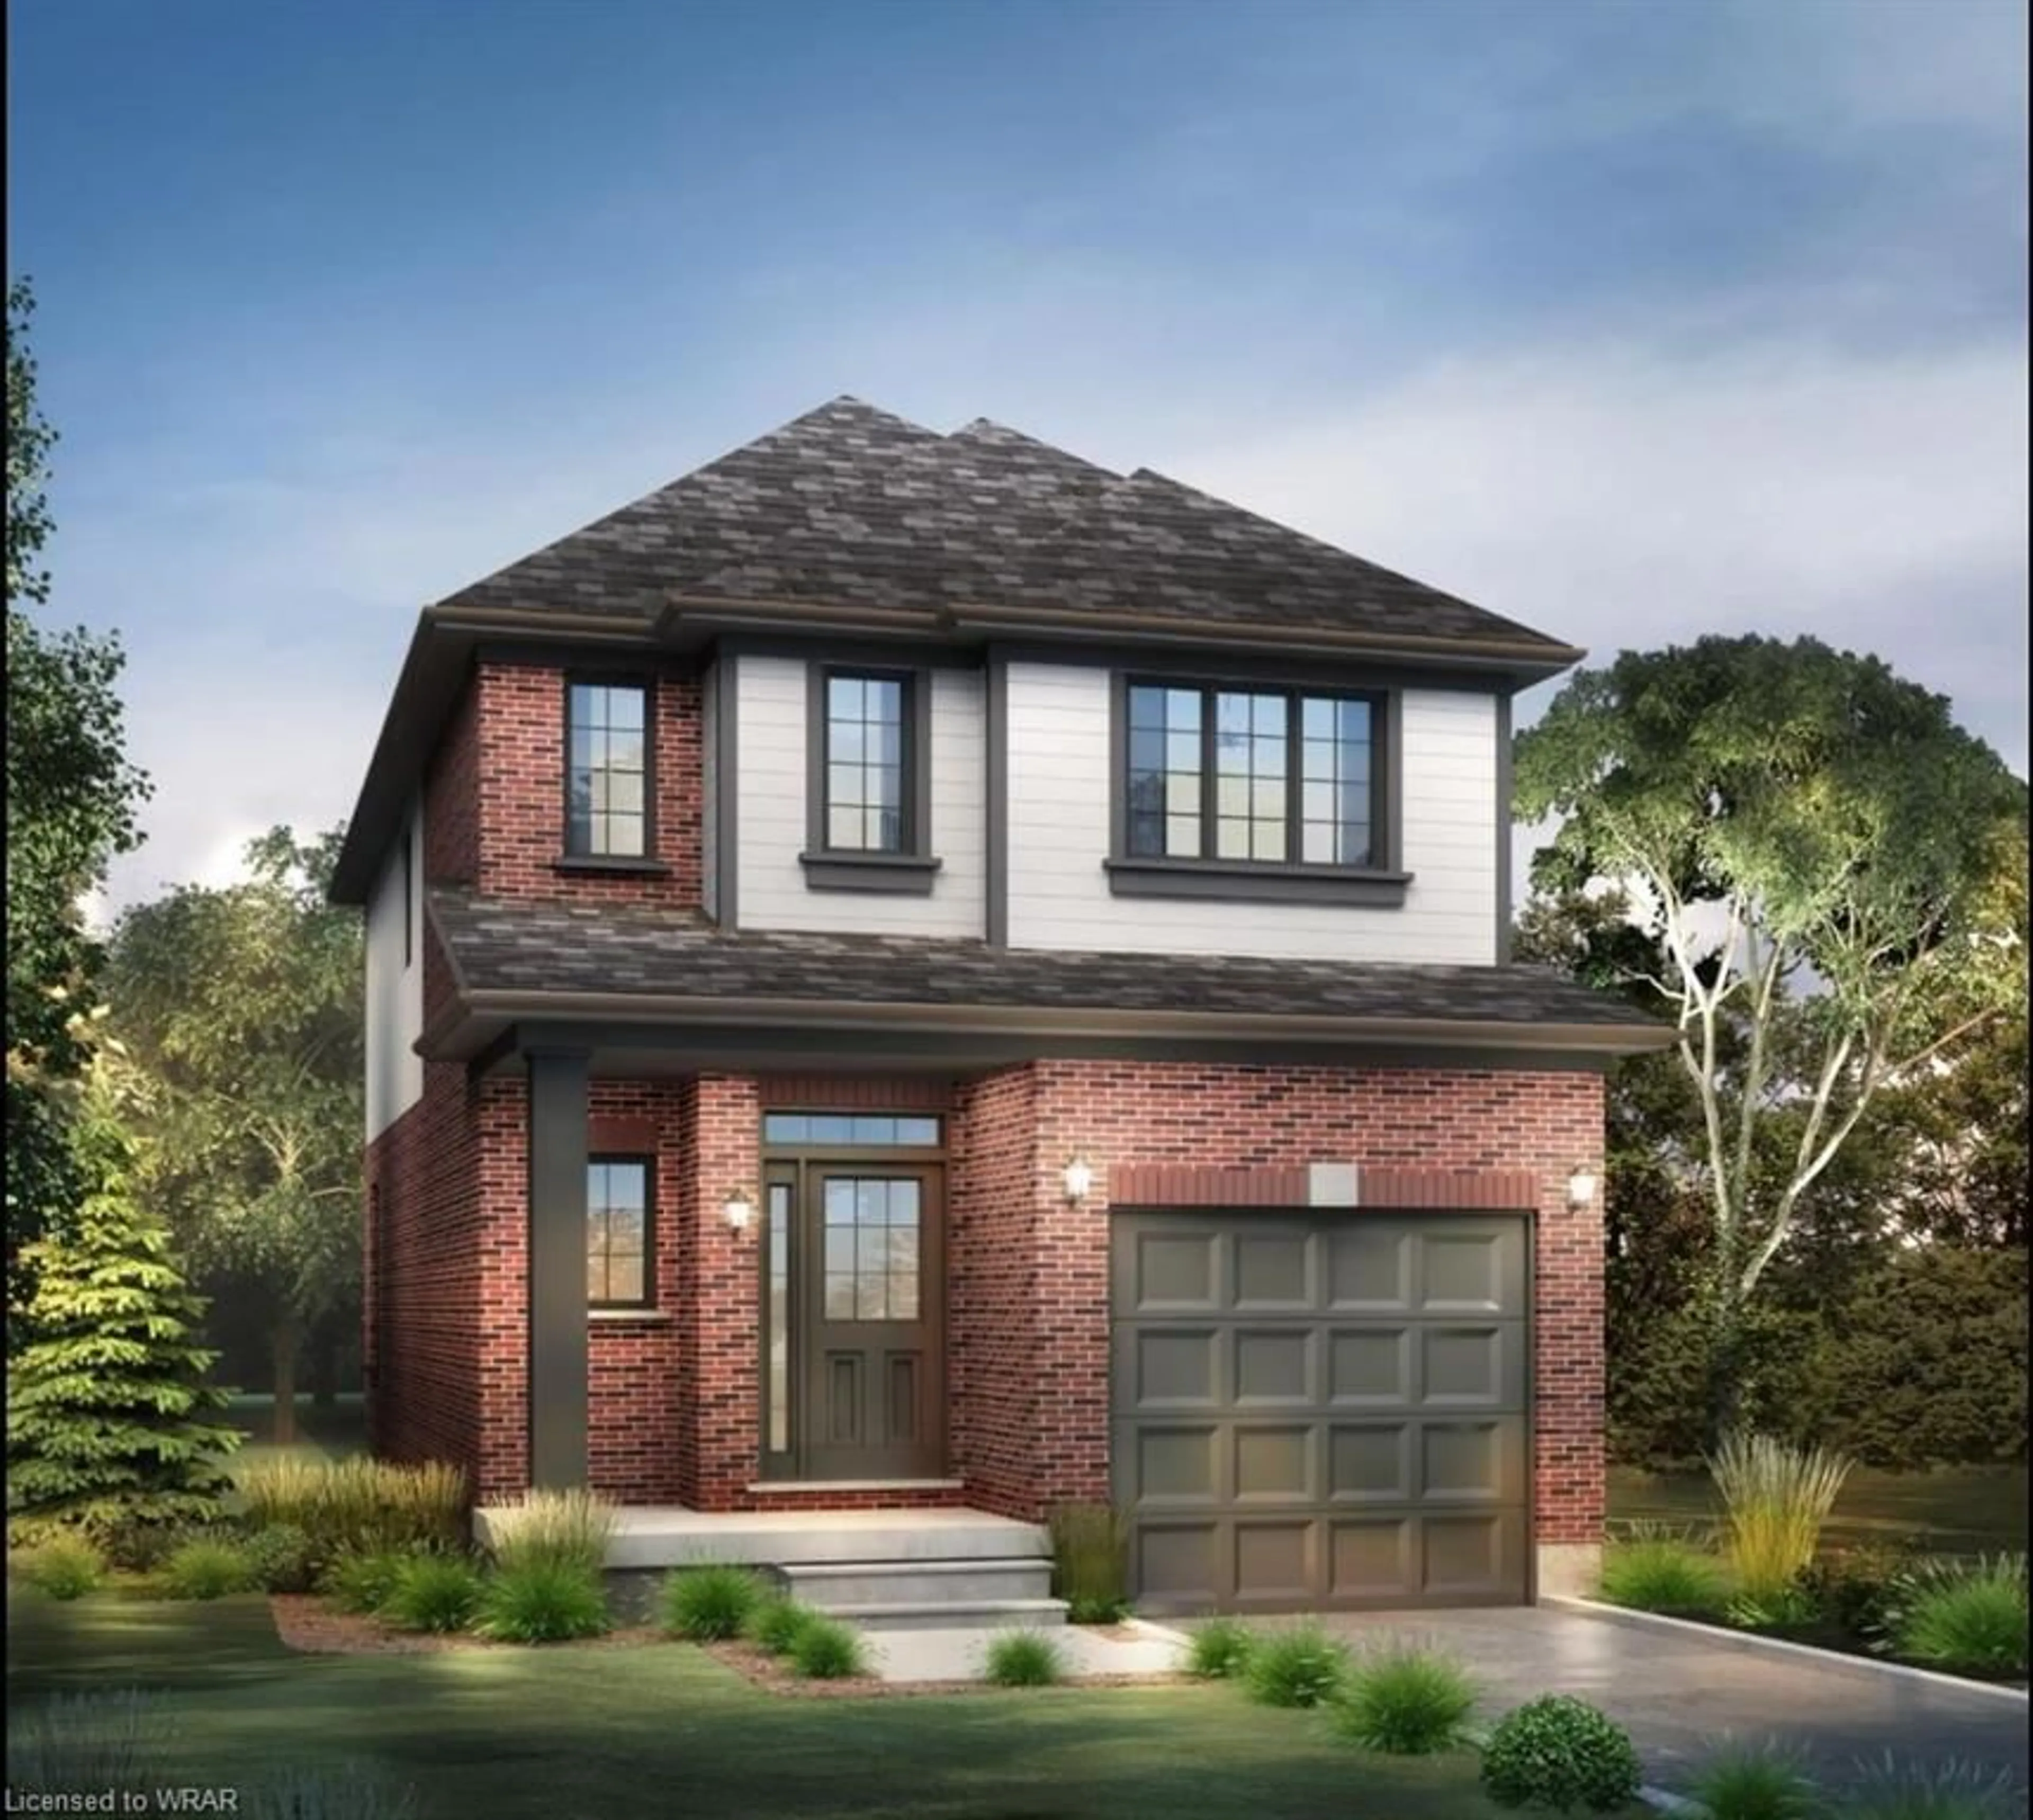 Home with brick exterior material for LOT 0078 Wild Chicory St, Kitchener Ontario N2P 0K7